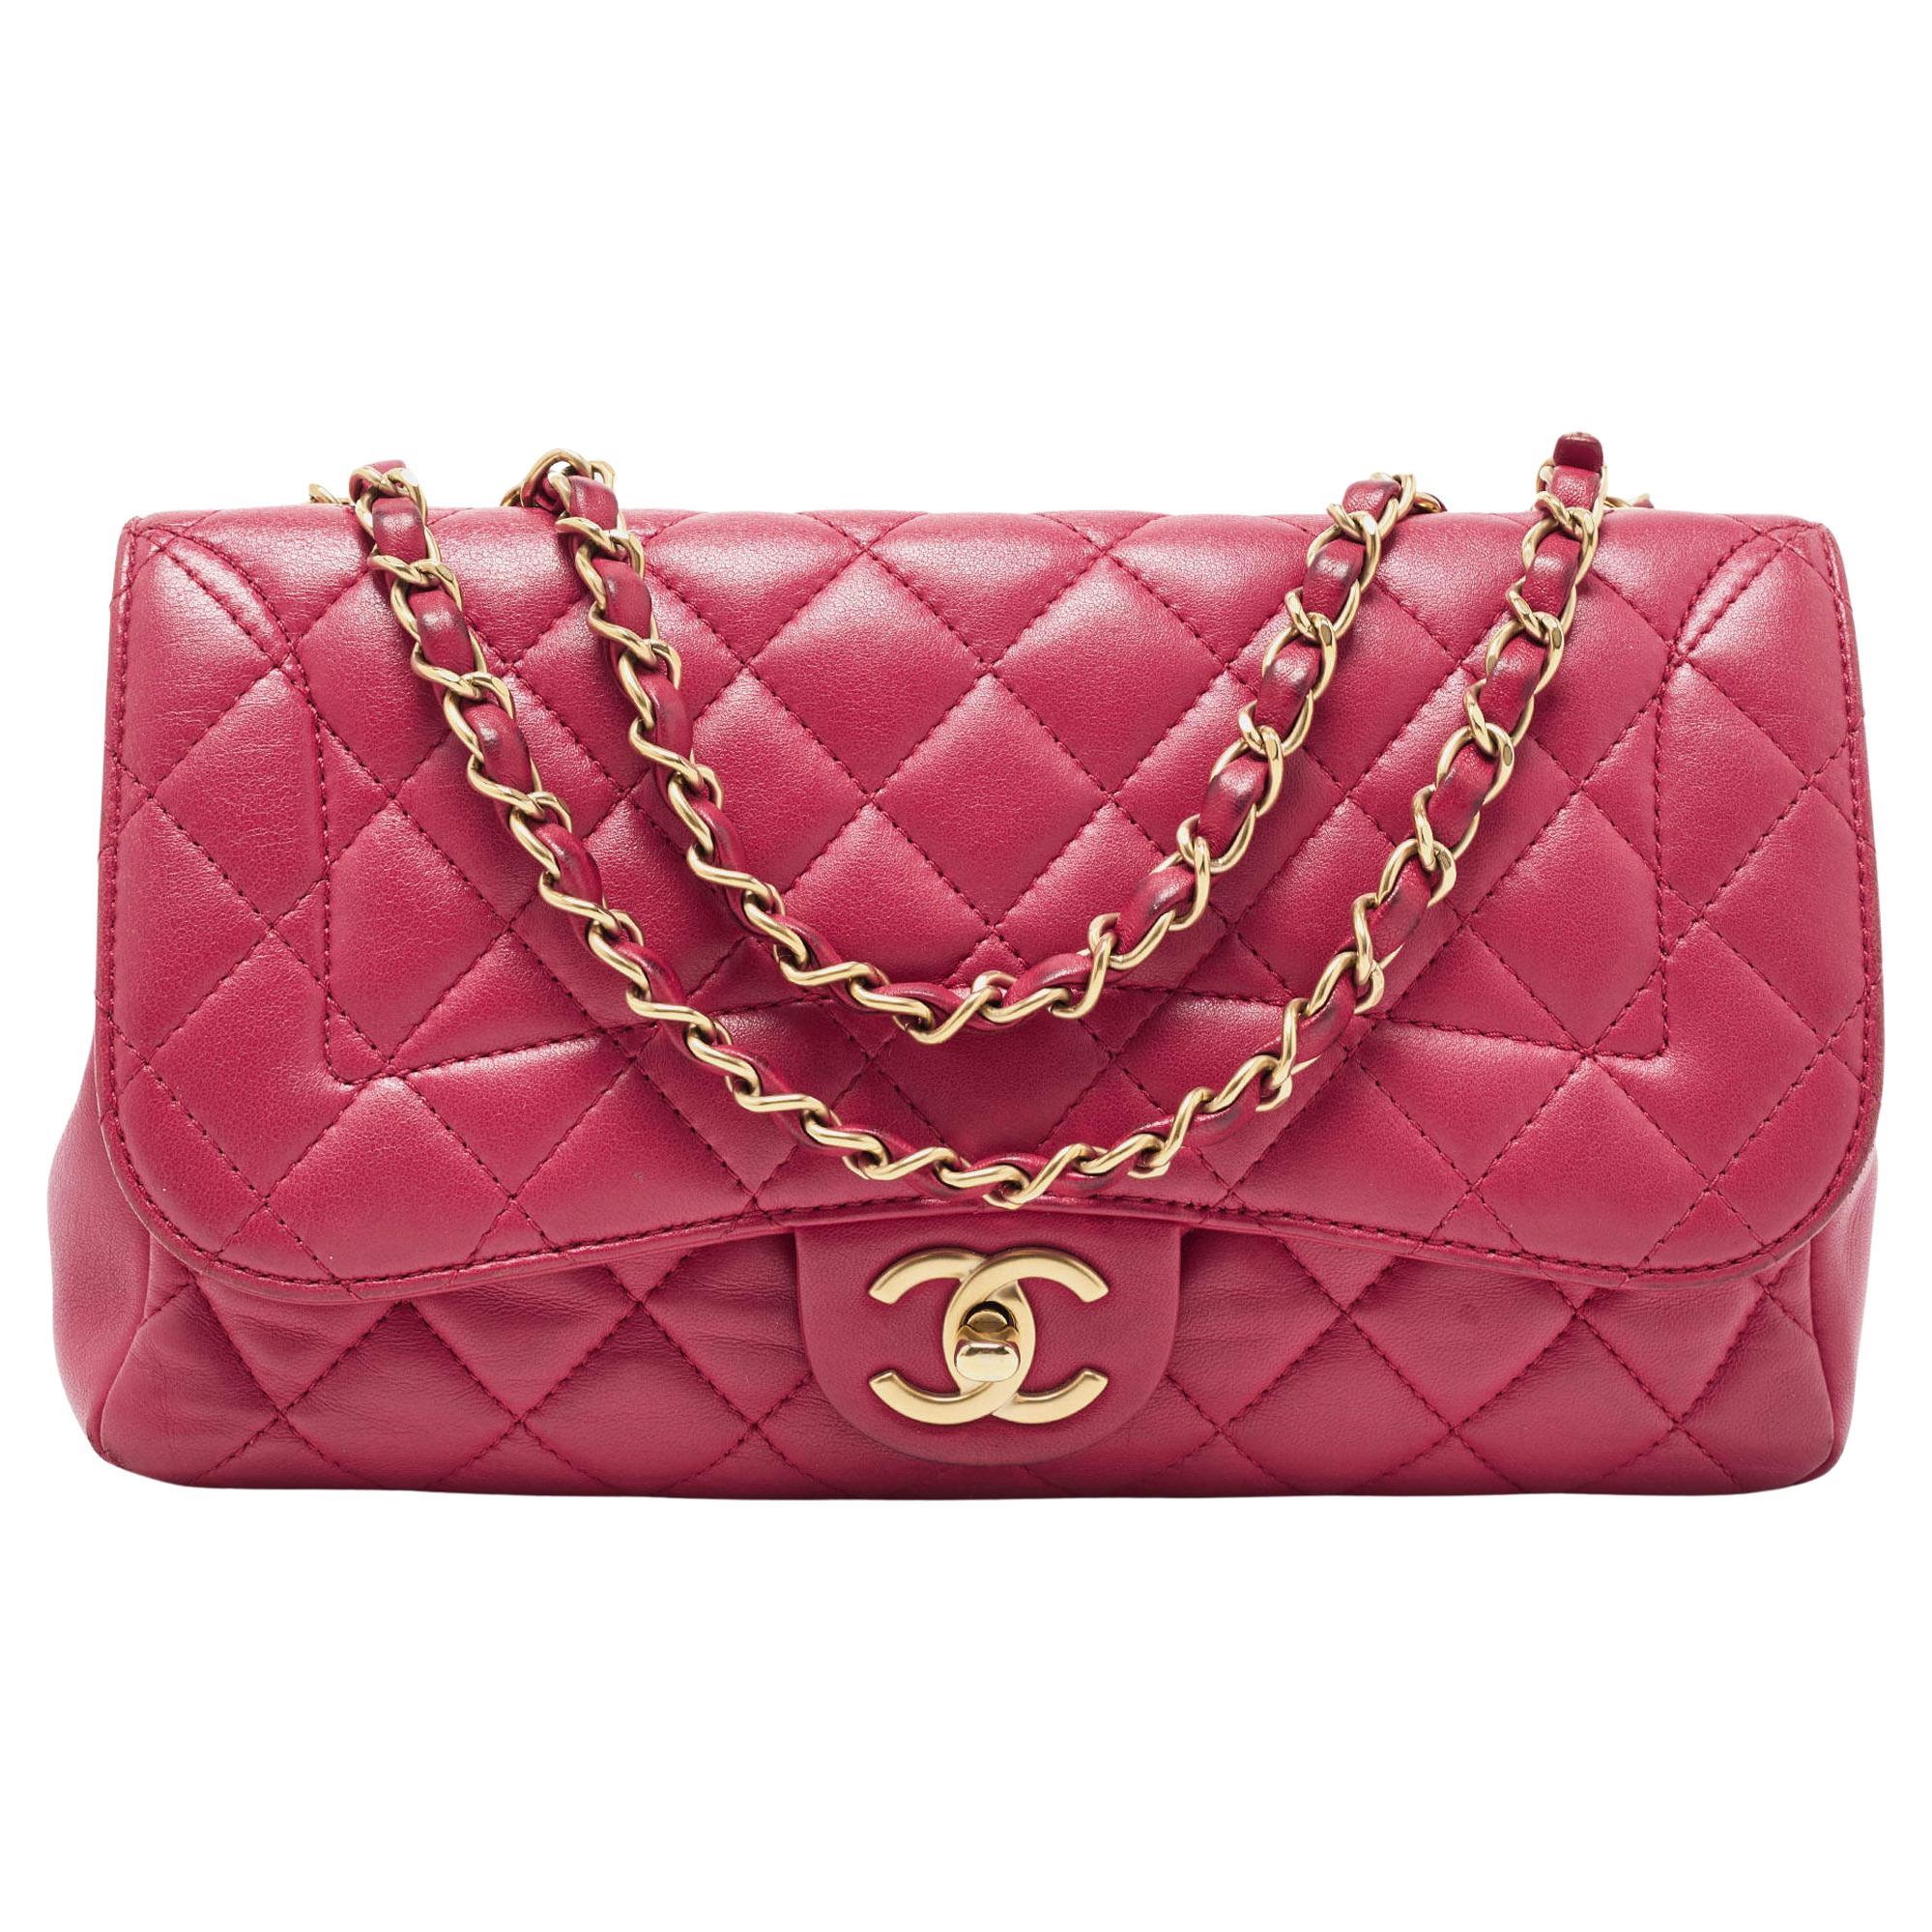 Chanel Red Quilted Leather Medium Mademoiselle Chic Flap Bag